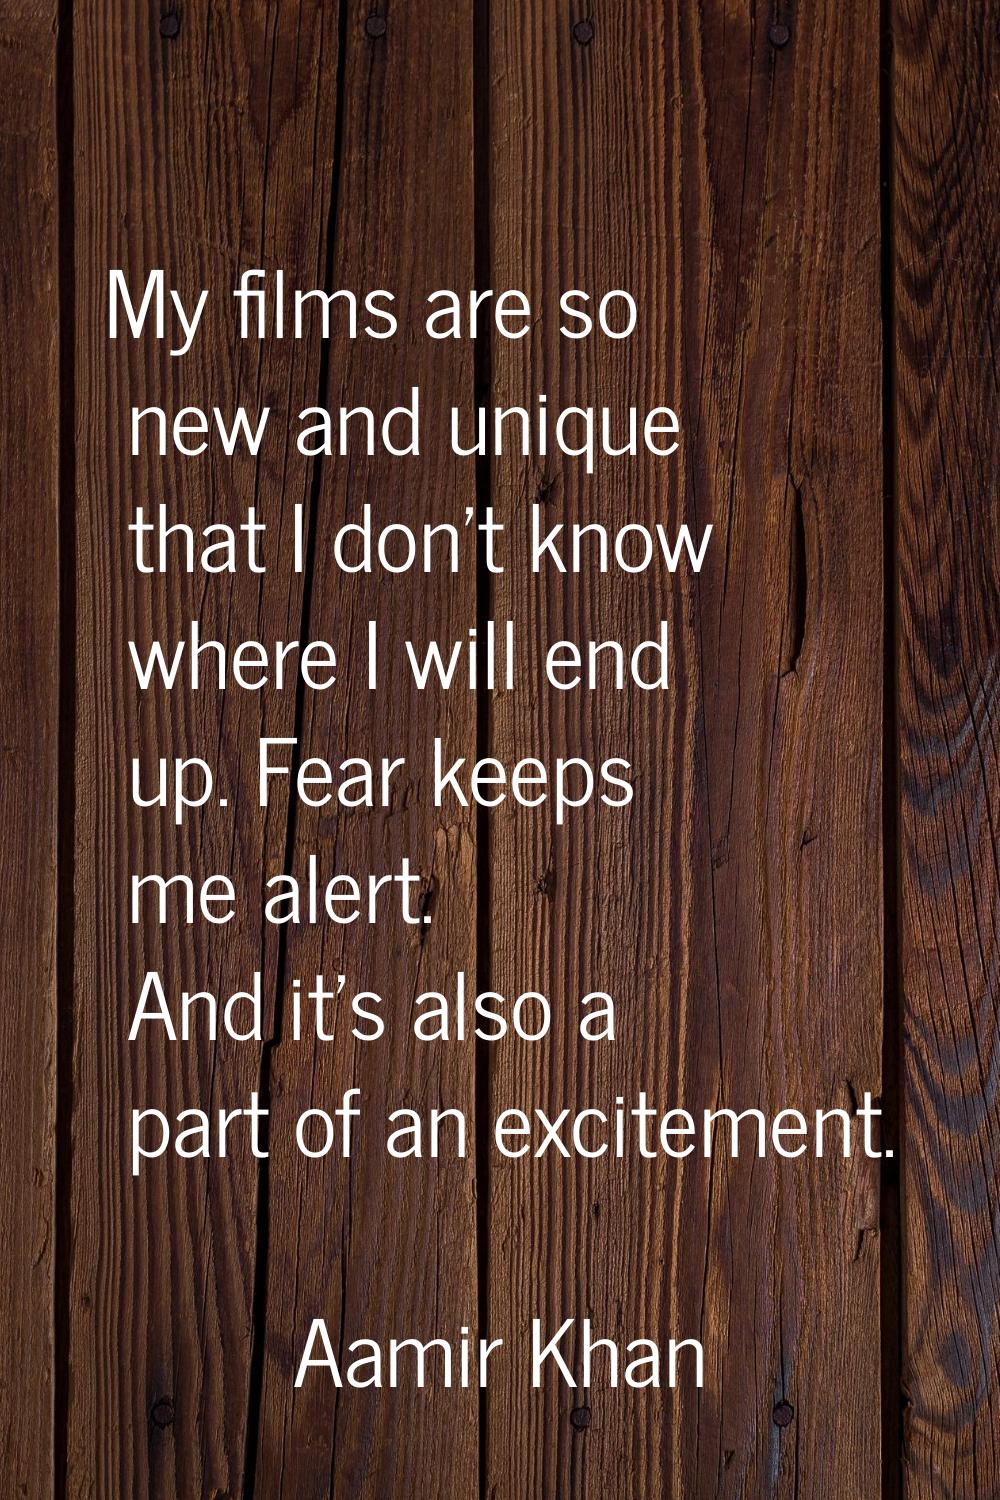 My films are so new and unique that I don't know where I will end up. Fear keeps me alert. And it's